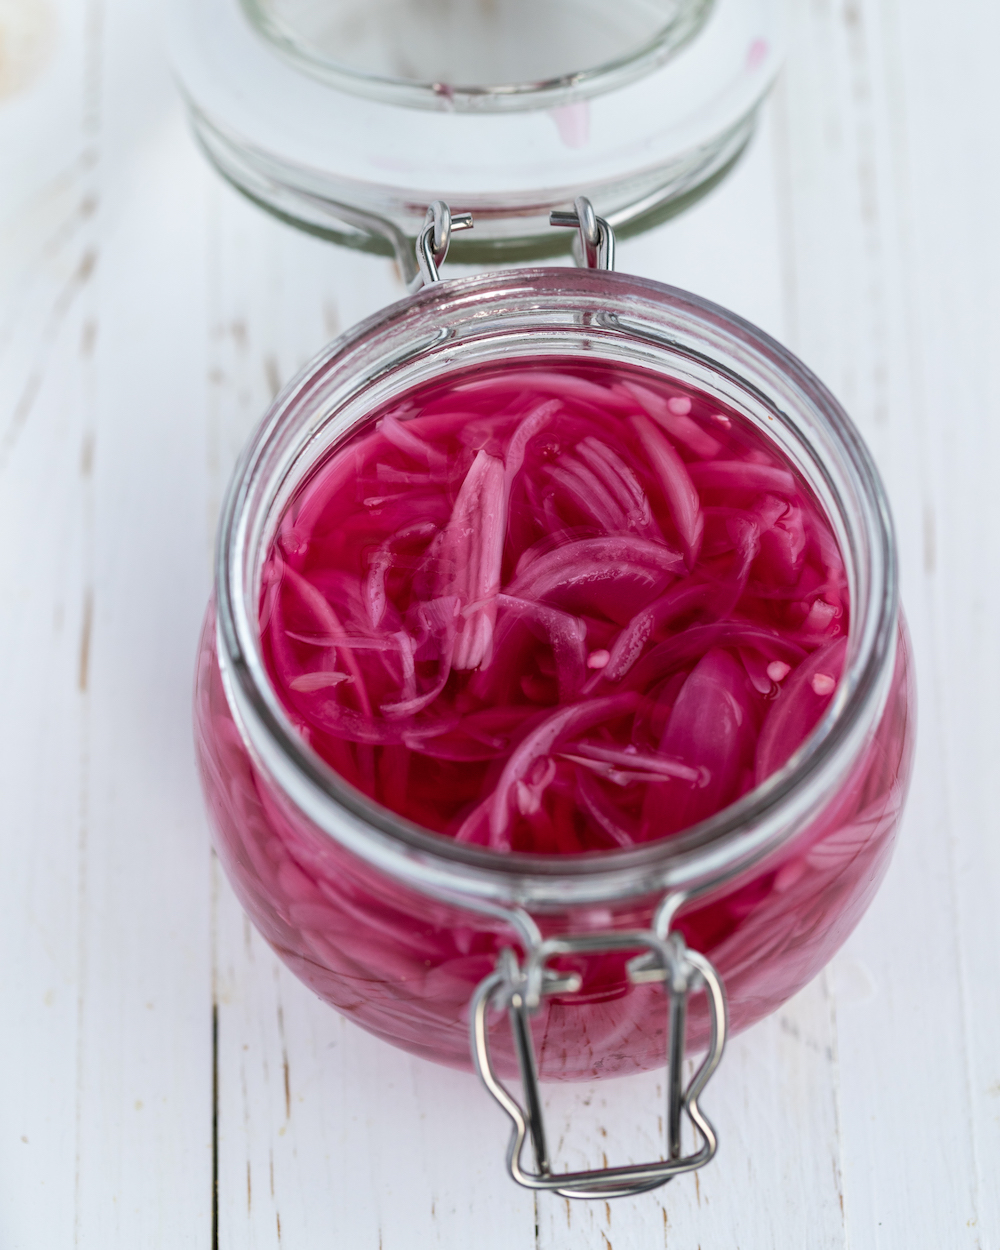 Quick pickled red onions in a glass jar on a white background